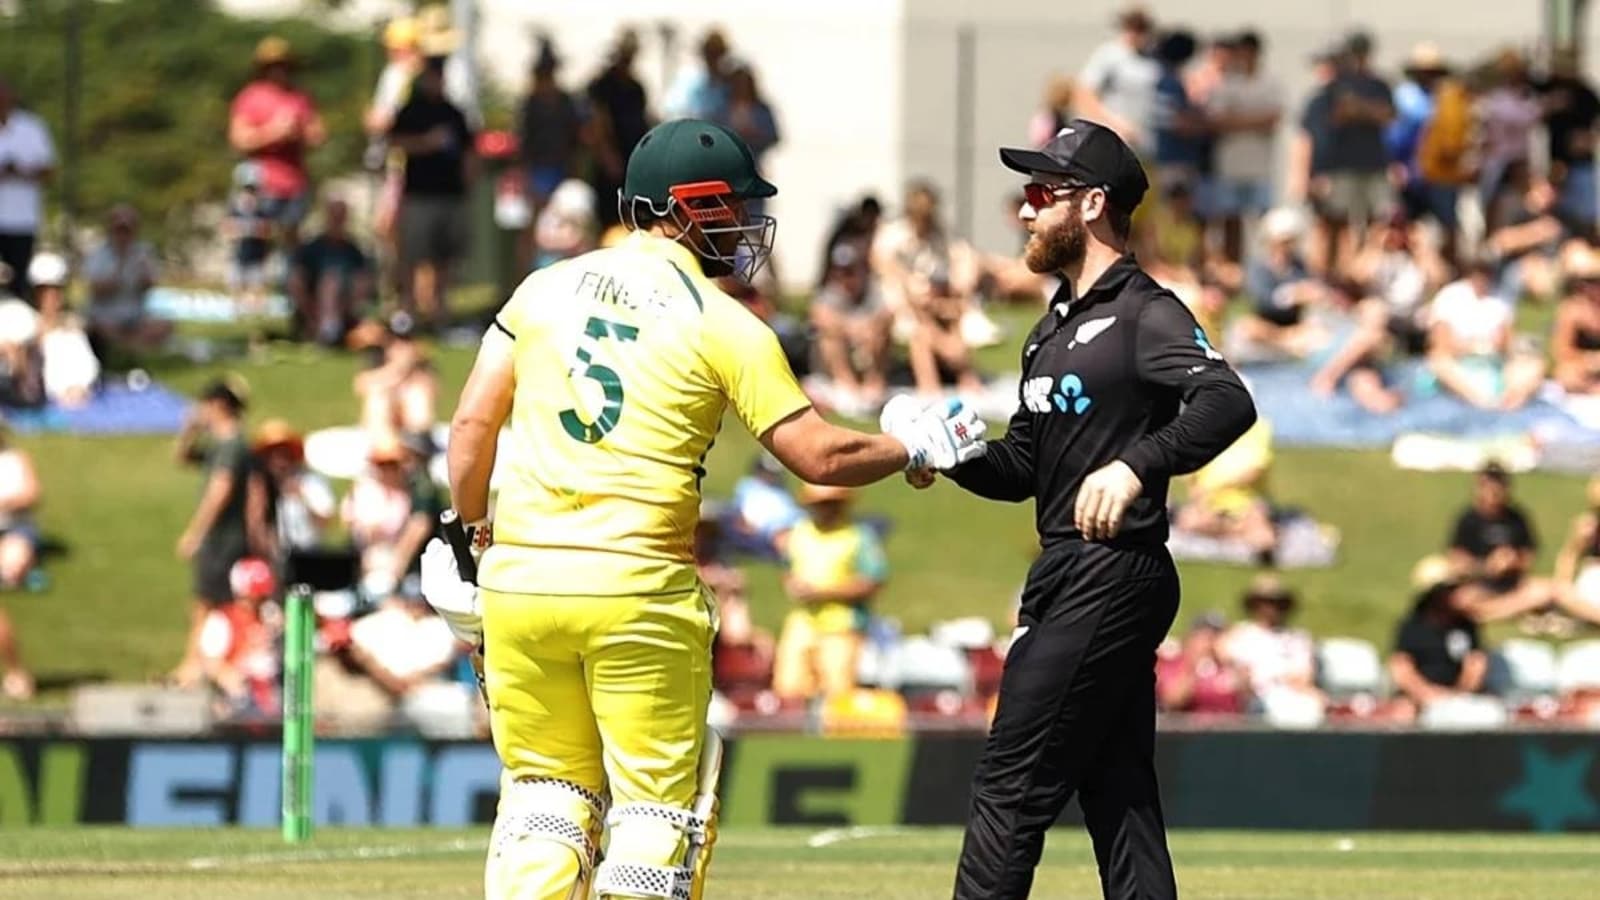 watch-new-zealand-s-classy-guard-of-honour-for-australia-captain-aaron-finch-in-his-final-odi